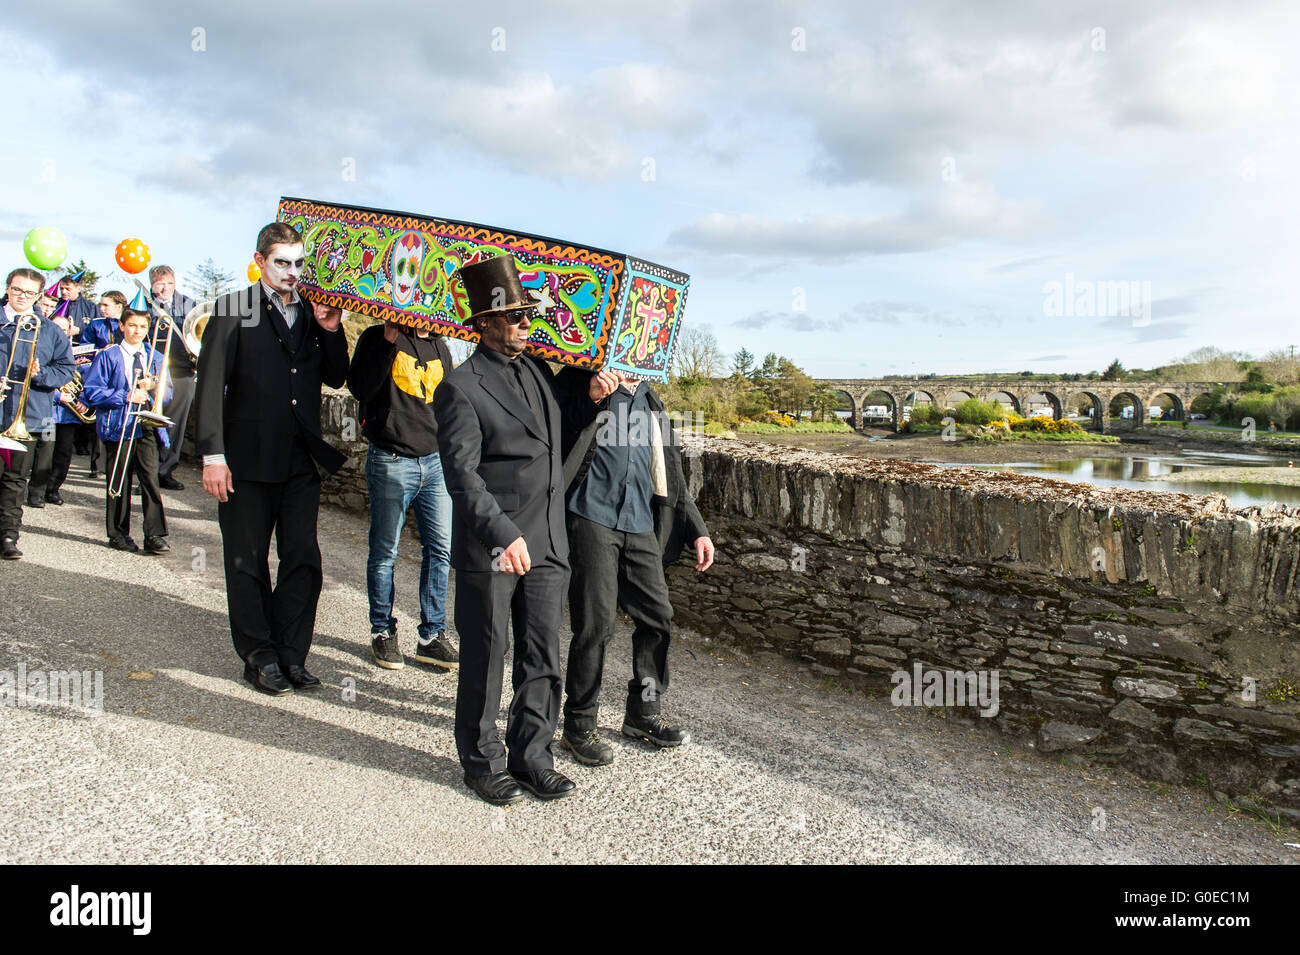 Ballydehob, Ireland. 30th April 2016. With the 12 Arch Bridge in the background, the coffin is carried across Ballydehob bridge during the Ballydehob Jazz Festival 'Day of the Dead' themed New Orleans Style Jazz Funeral. Credit: Andy Gibson/Alamy Live News Stock Photo